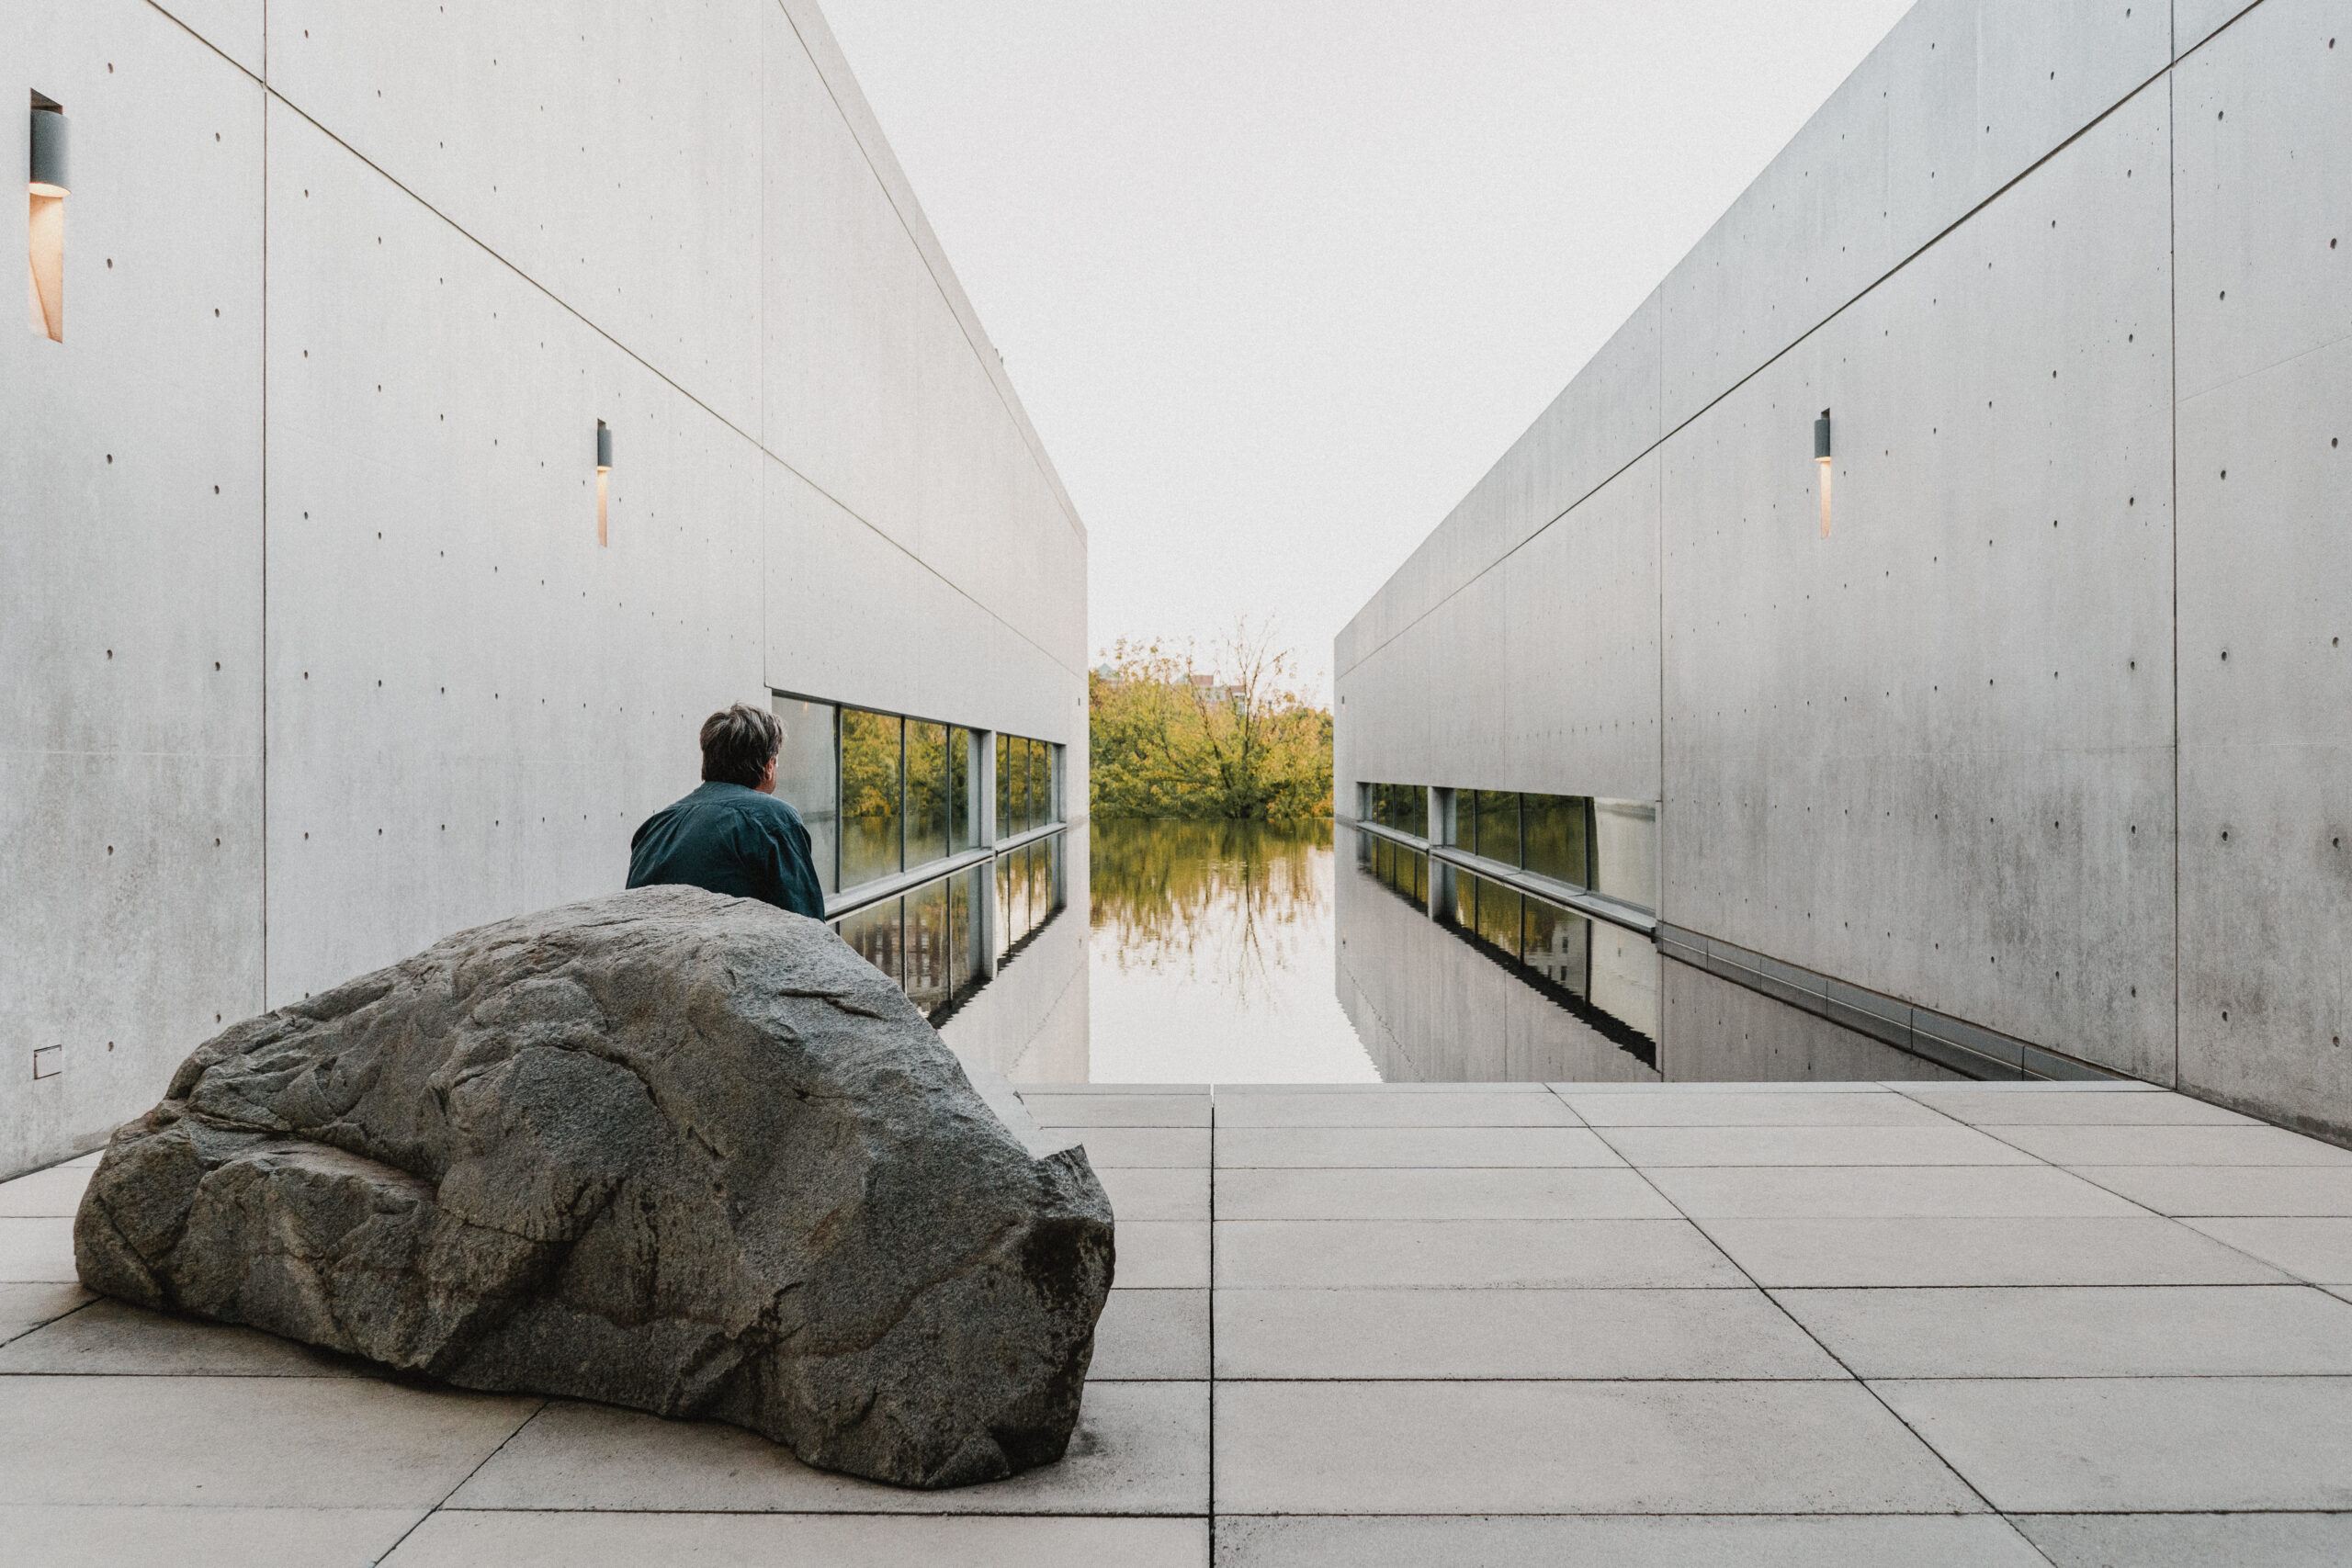 Individual sitting on "Rock Settee" sculpture by Scott Burton in the watercourt of the Pulitzer Arts Foundation